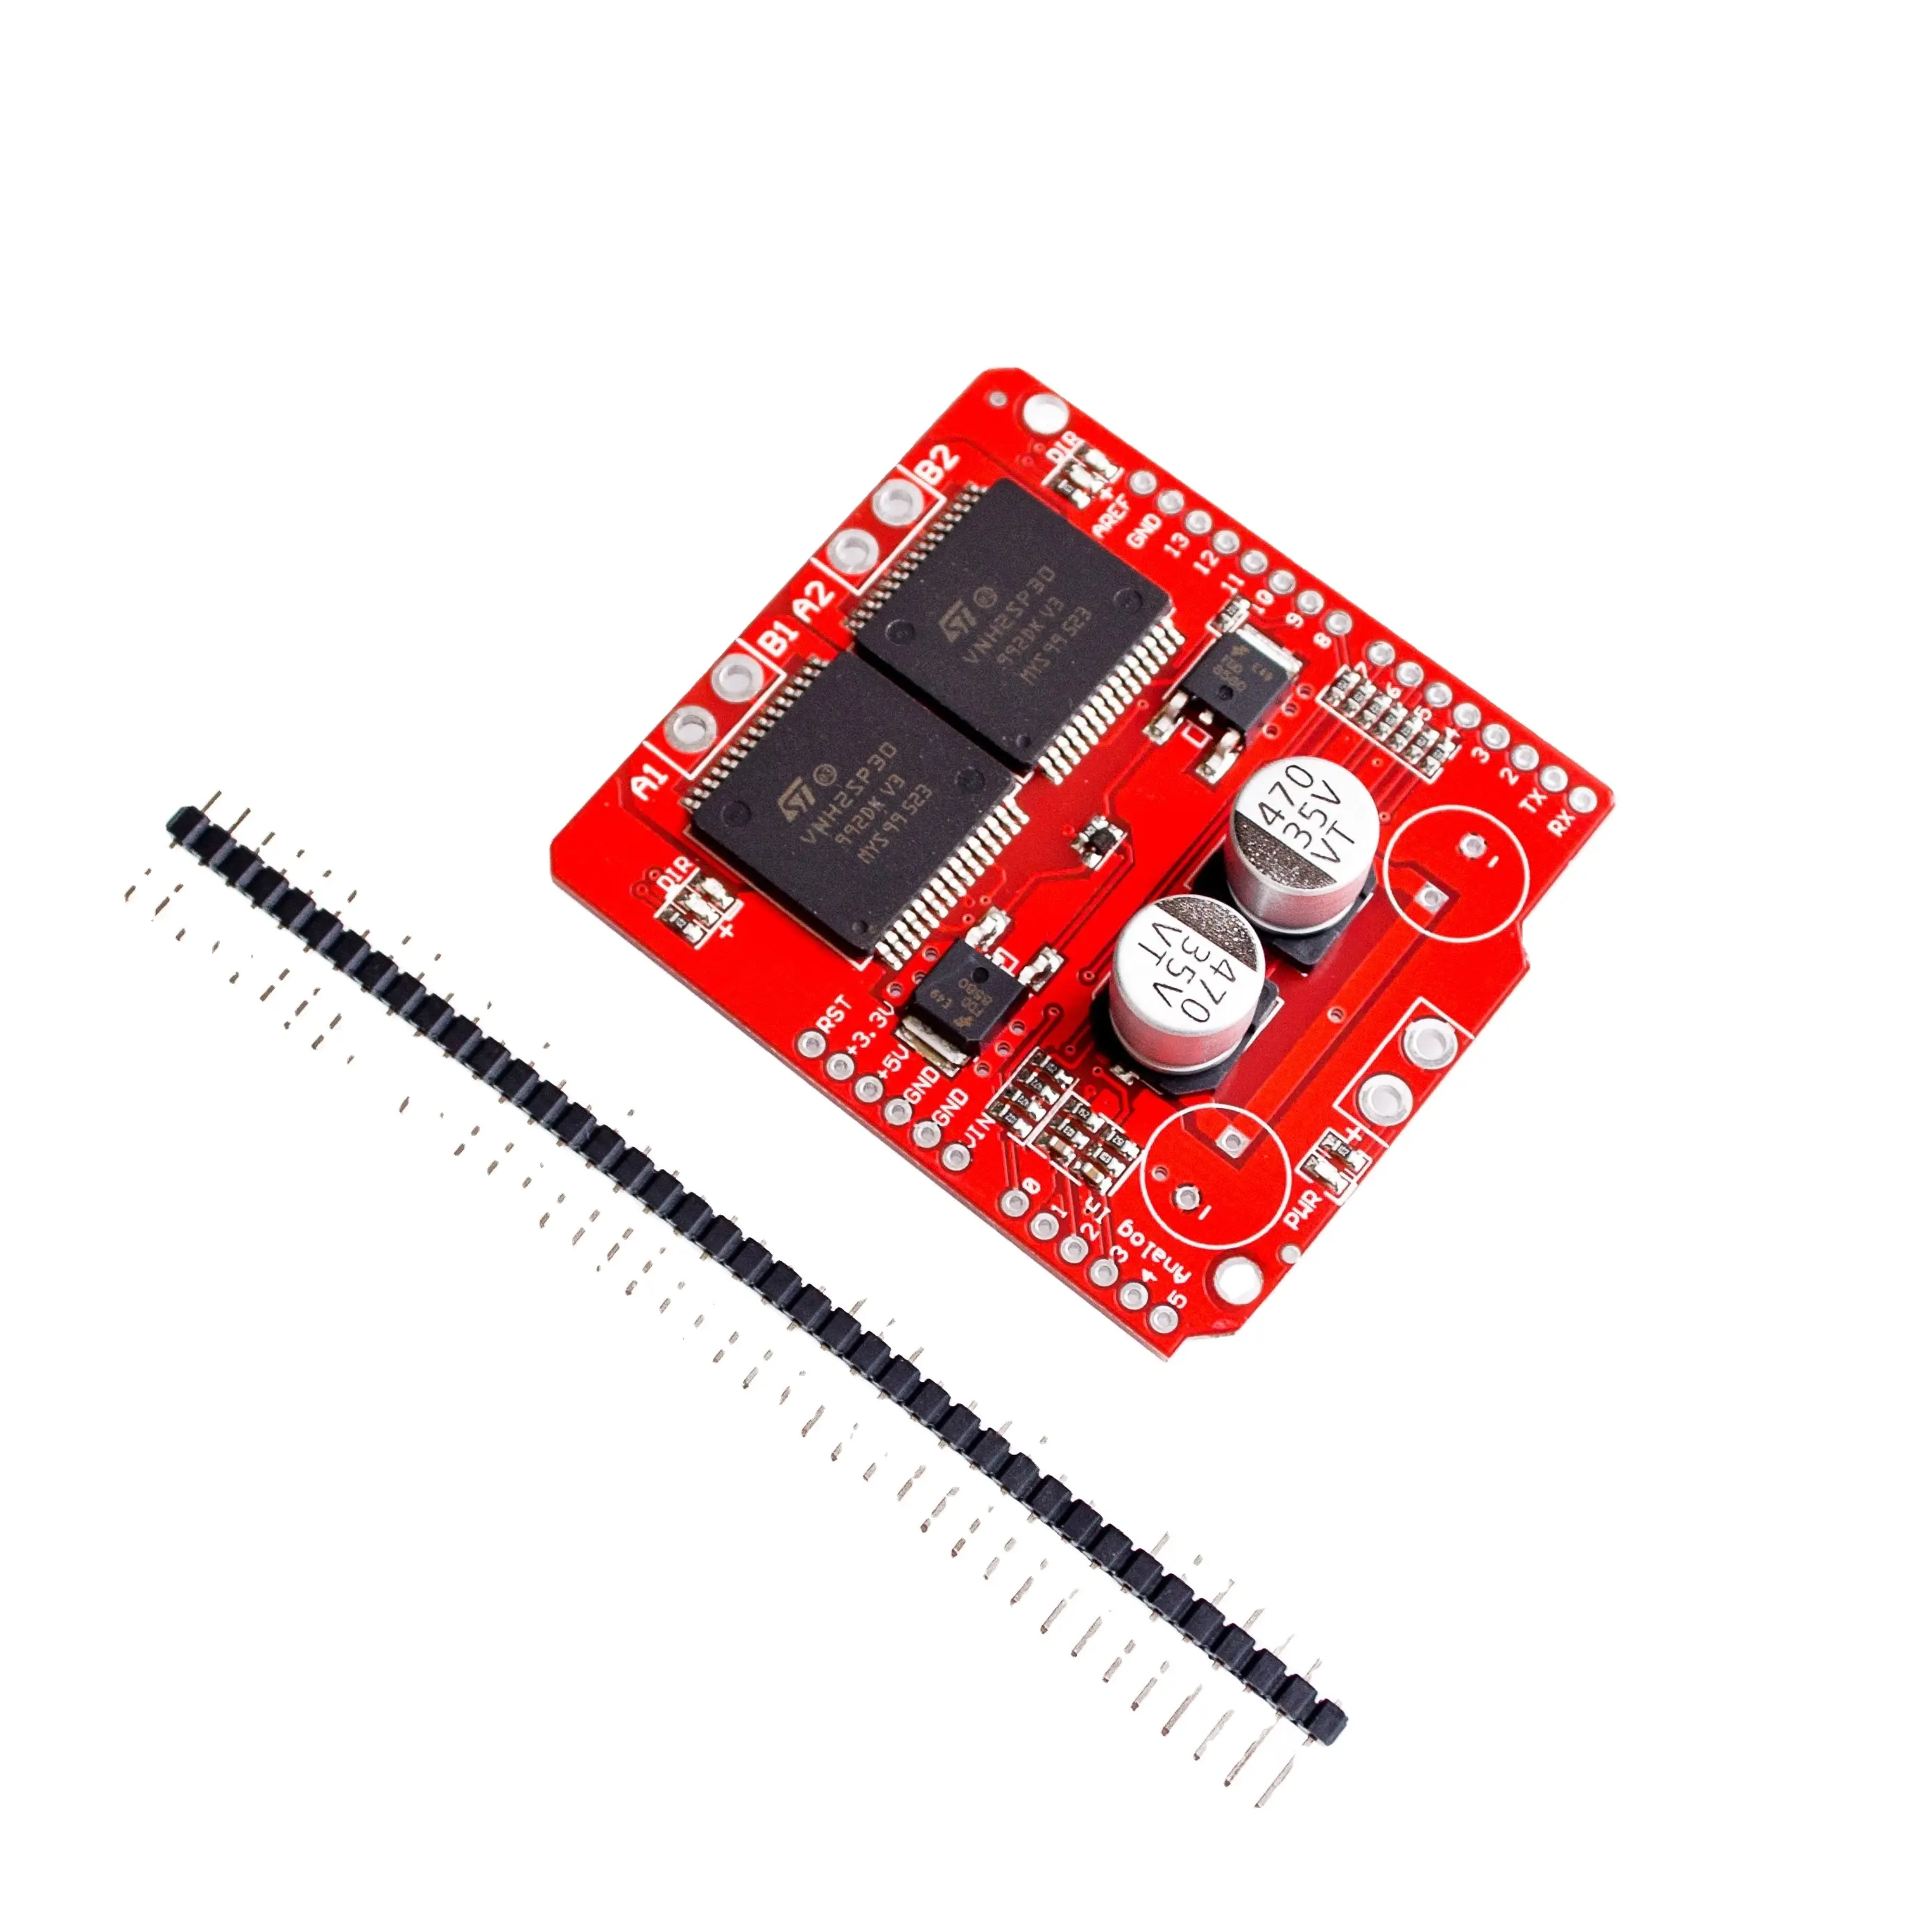 Hot Selling Monster Moto Shield VNH2SP30 stepper motor driver module high current 30A Integrated Circuits IN STOCK